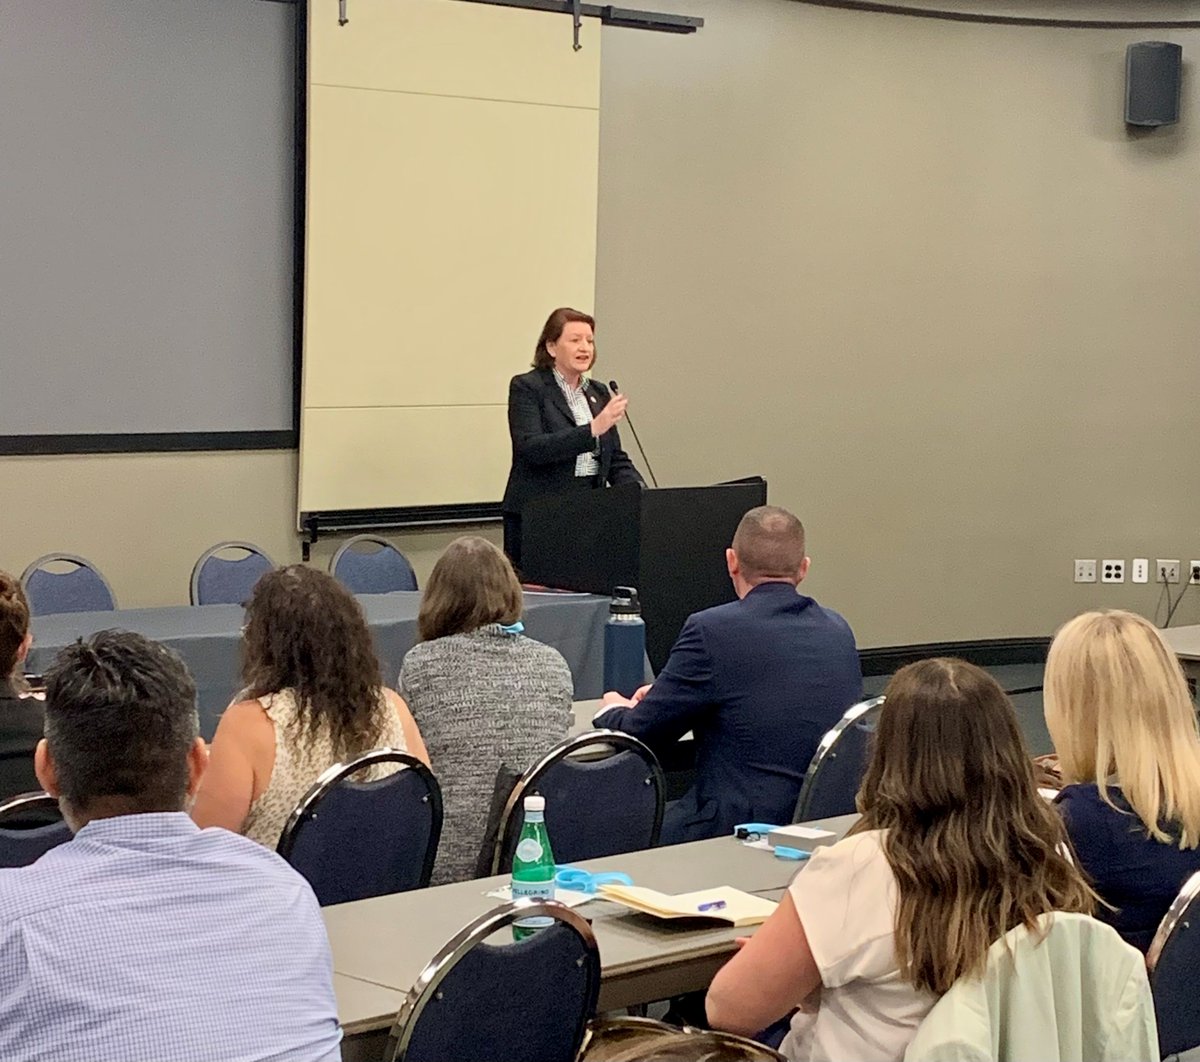 Today, I joined @CALNENA911 to thank our 9-1-1 dispatchers for all they do to keep our communities safe and respond to all types of emergencies. I’m committed to supporting these essential workers who provide critical services to Californians.